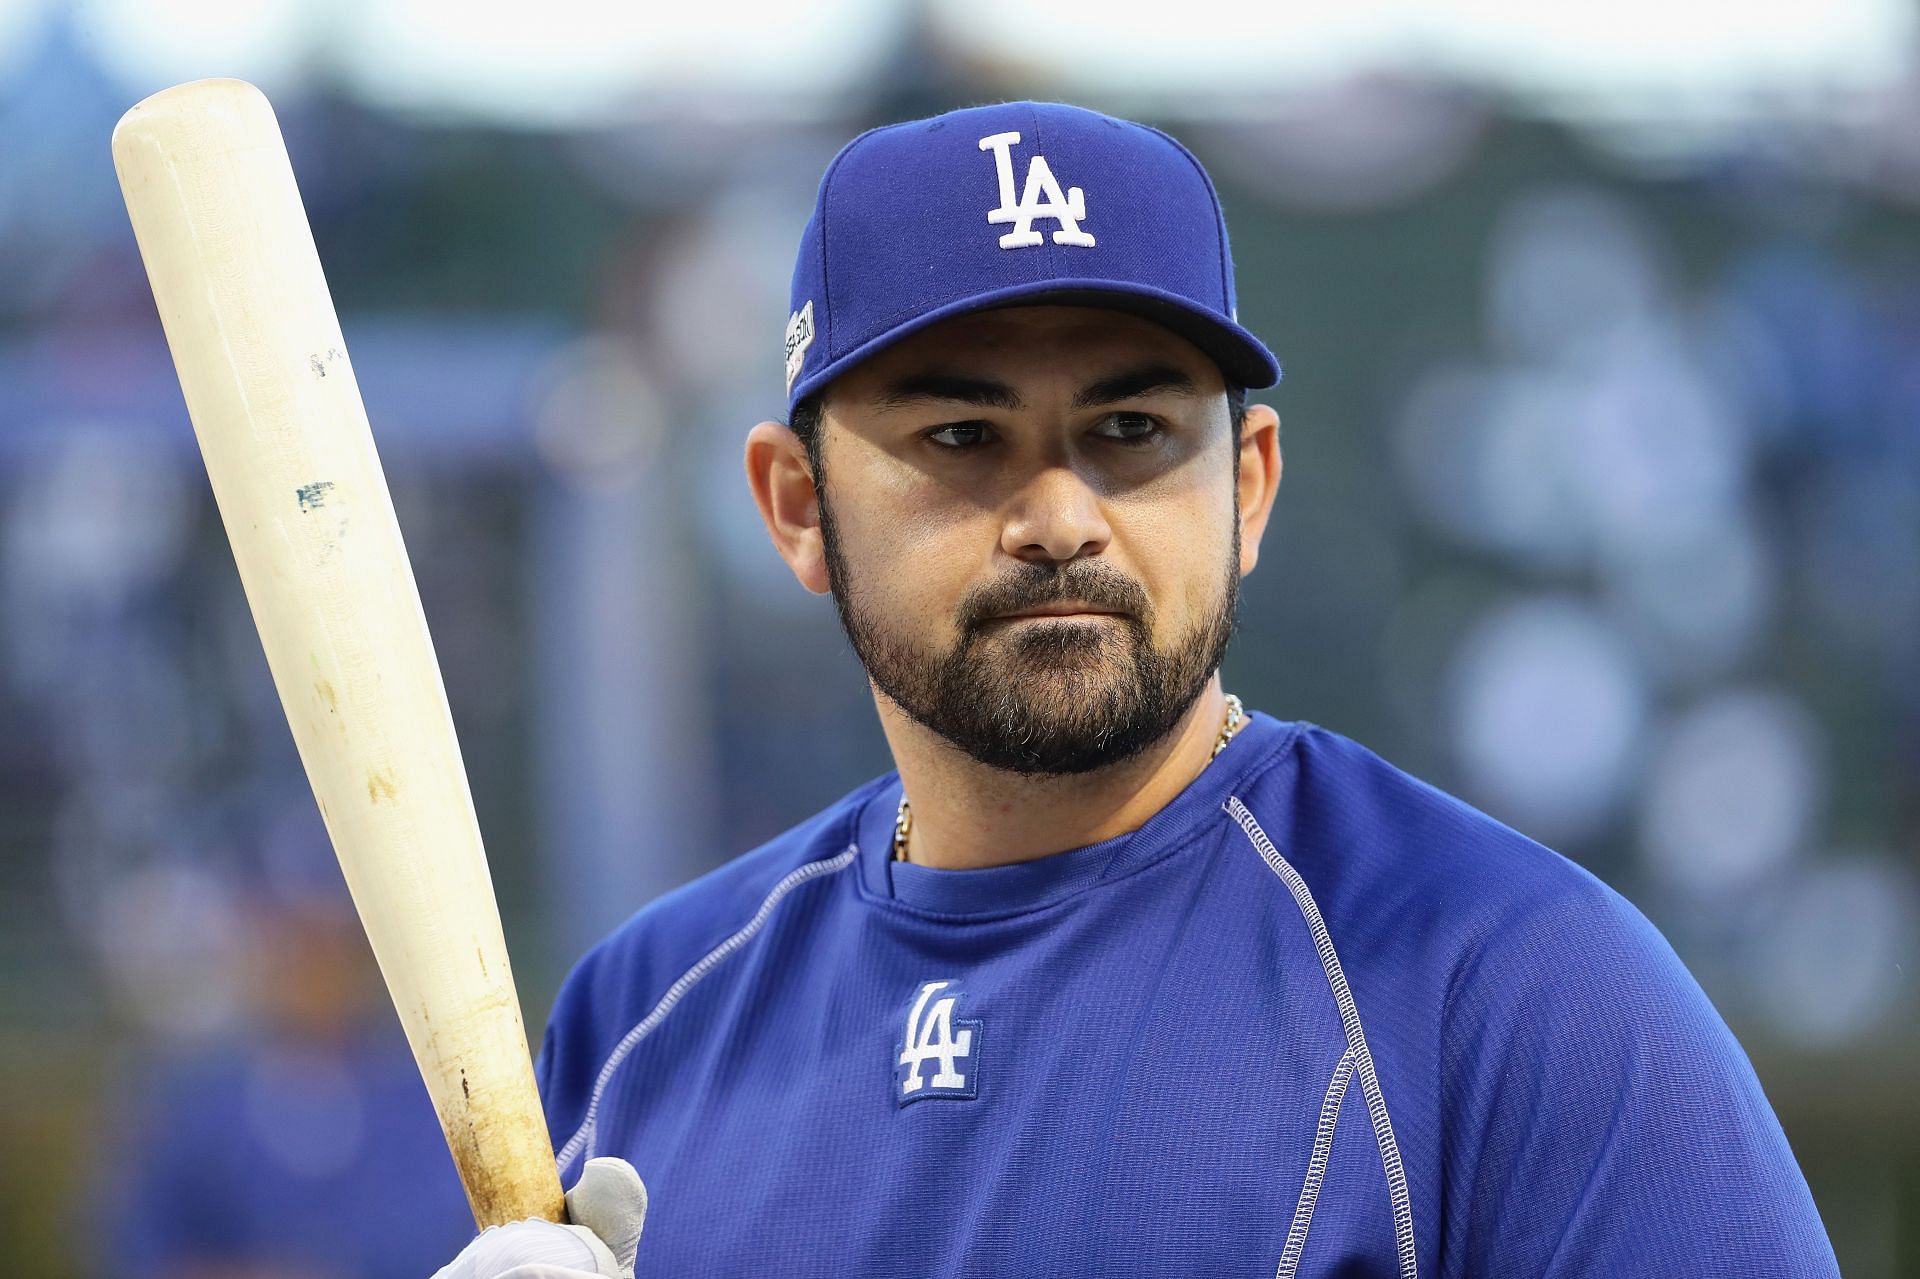 Adrian Gonzalez to play for Mexico in World Baseball Classic